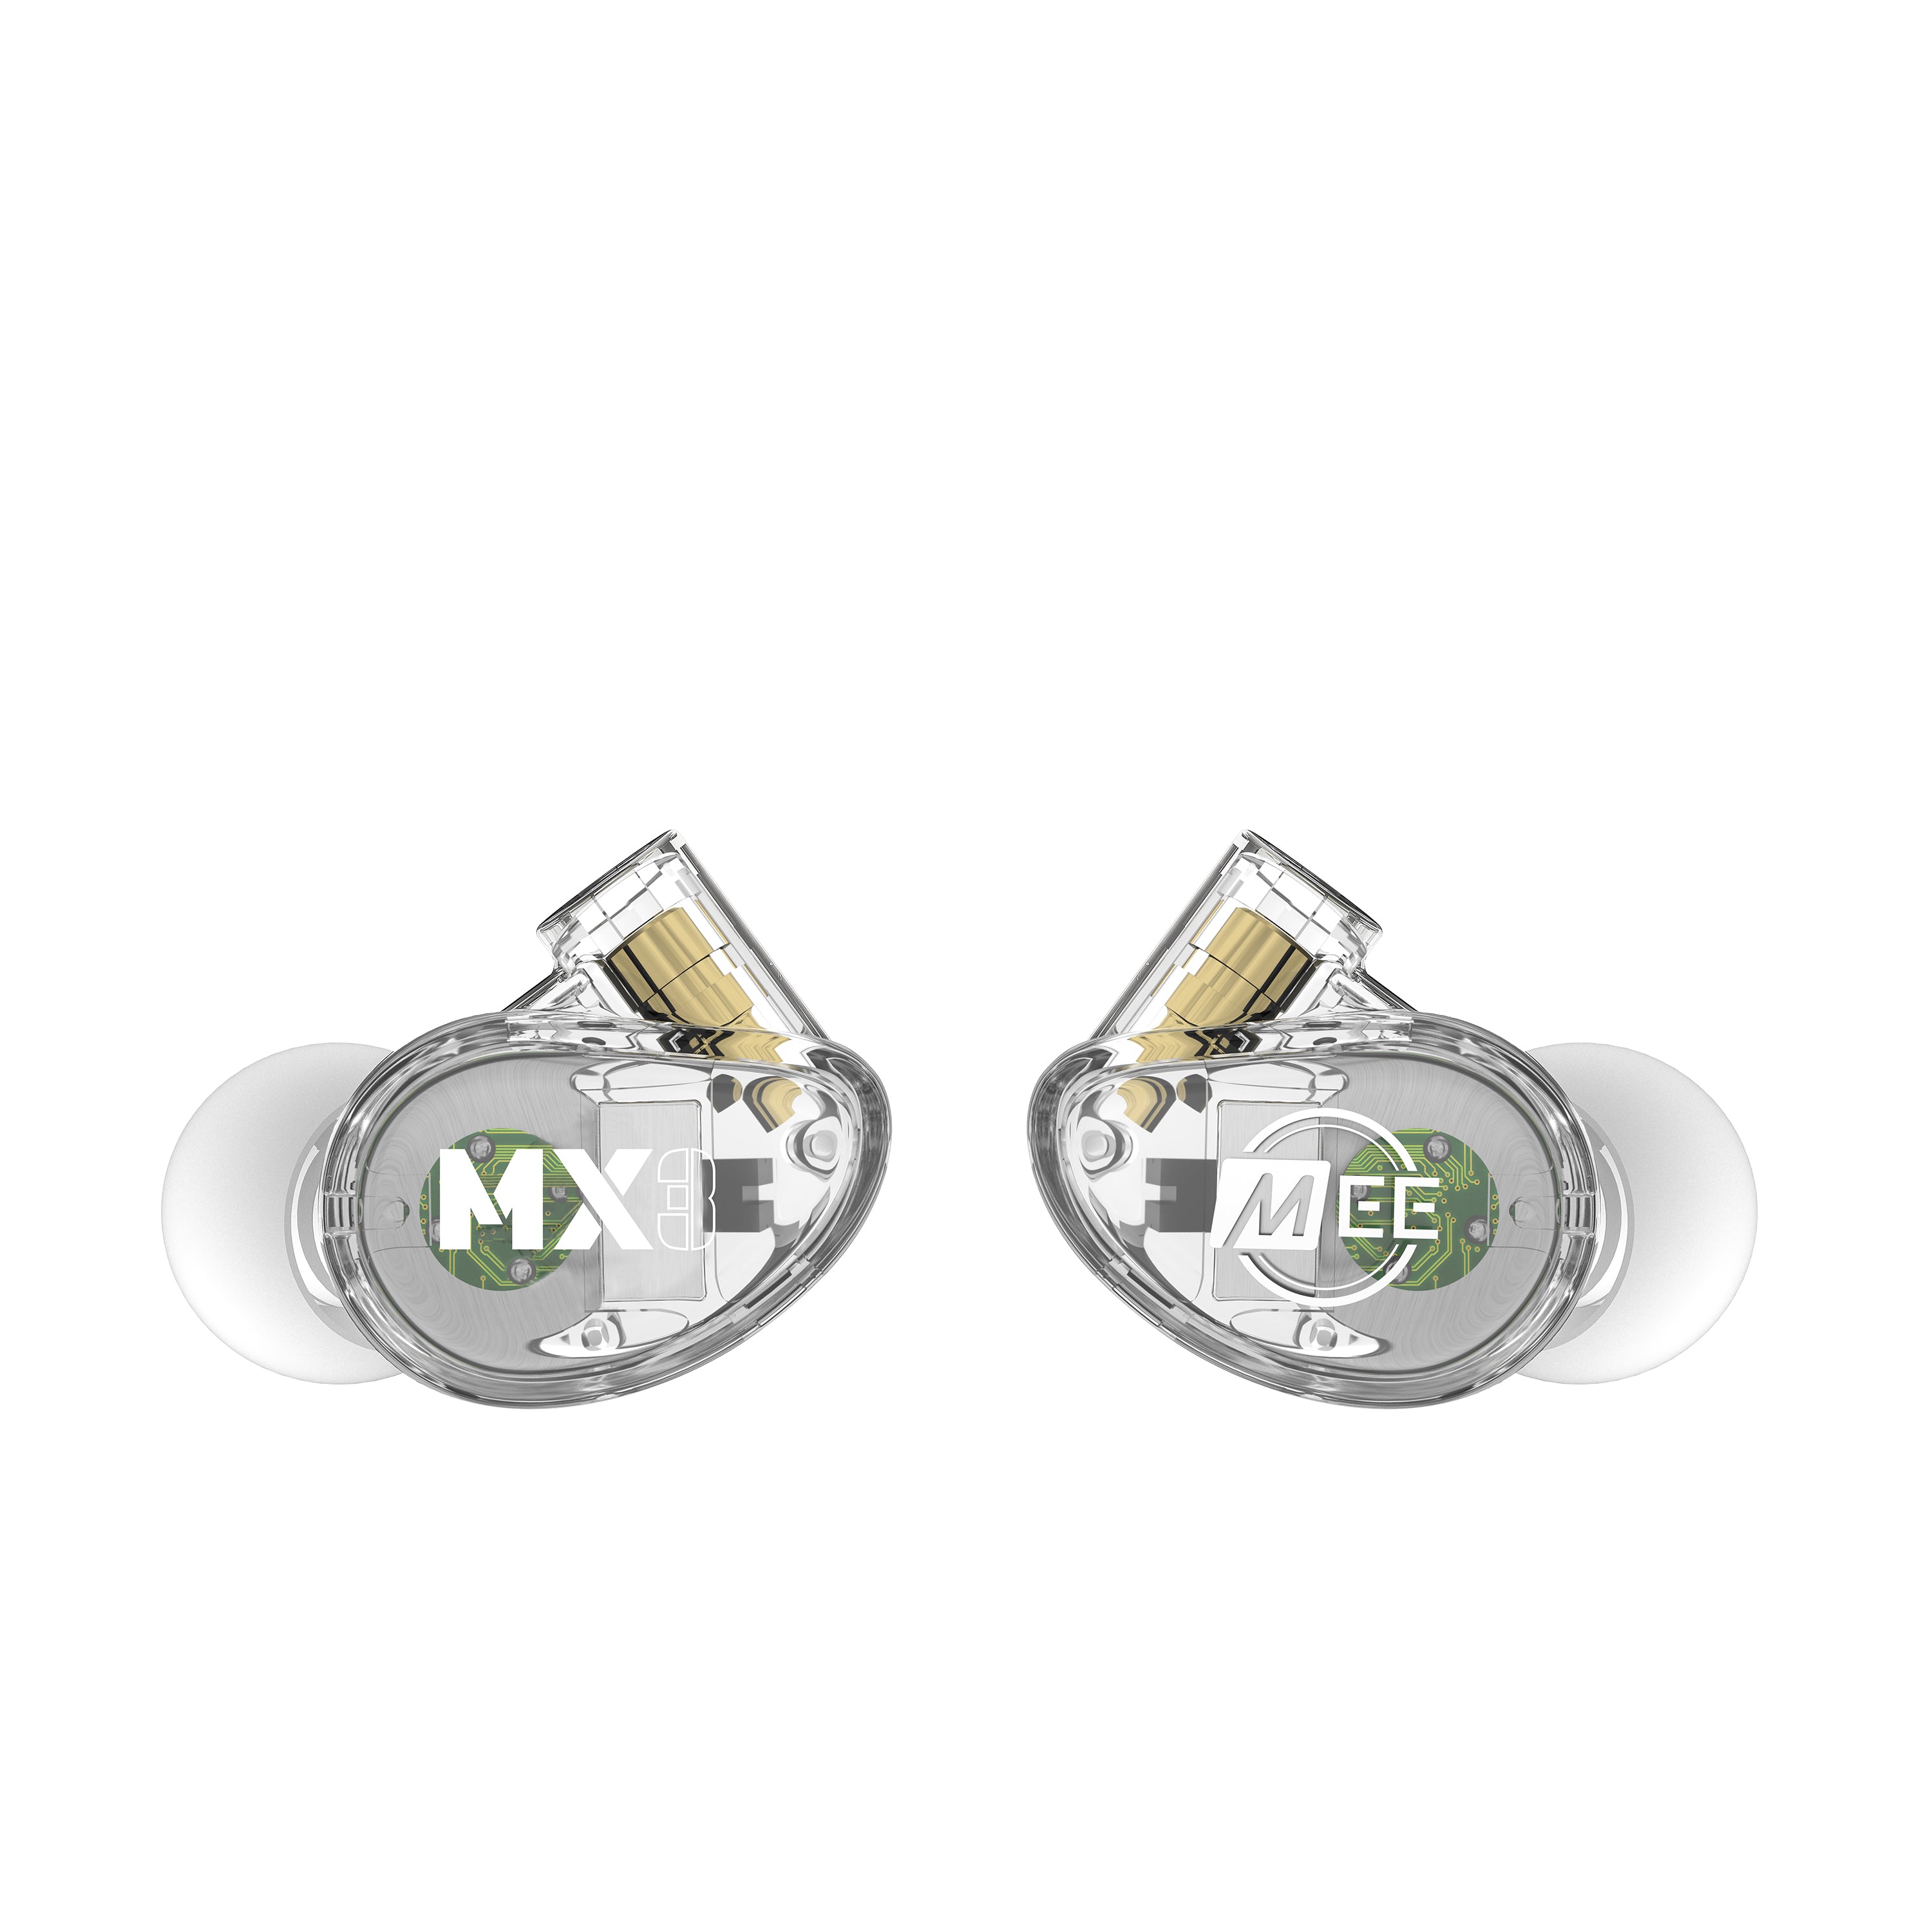 Image of Replacement Earpieces for MX PRO In-Ear Monitors.